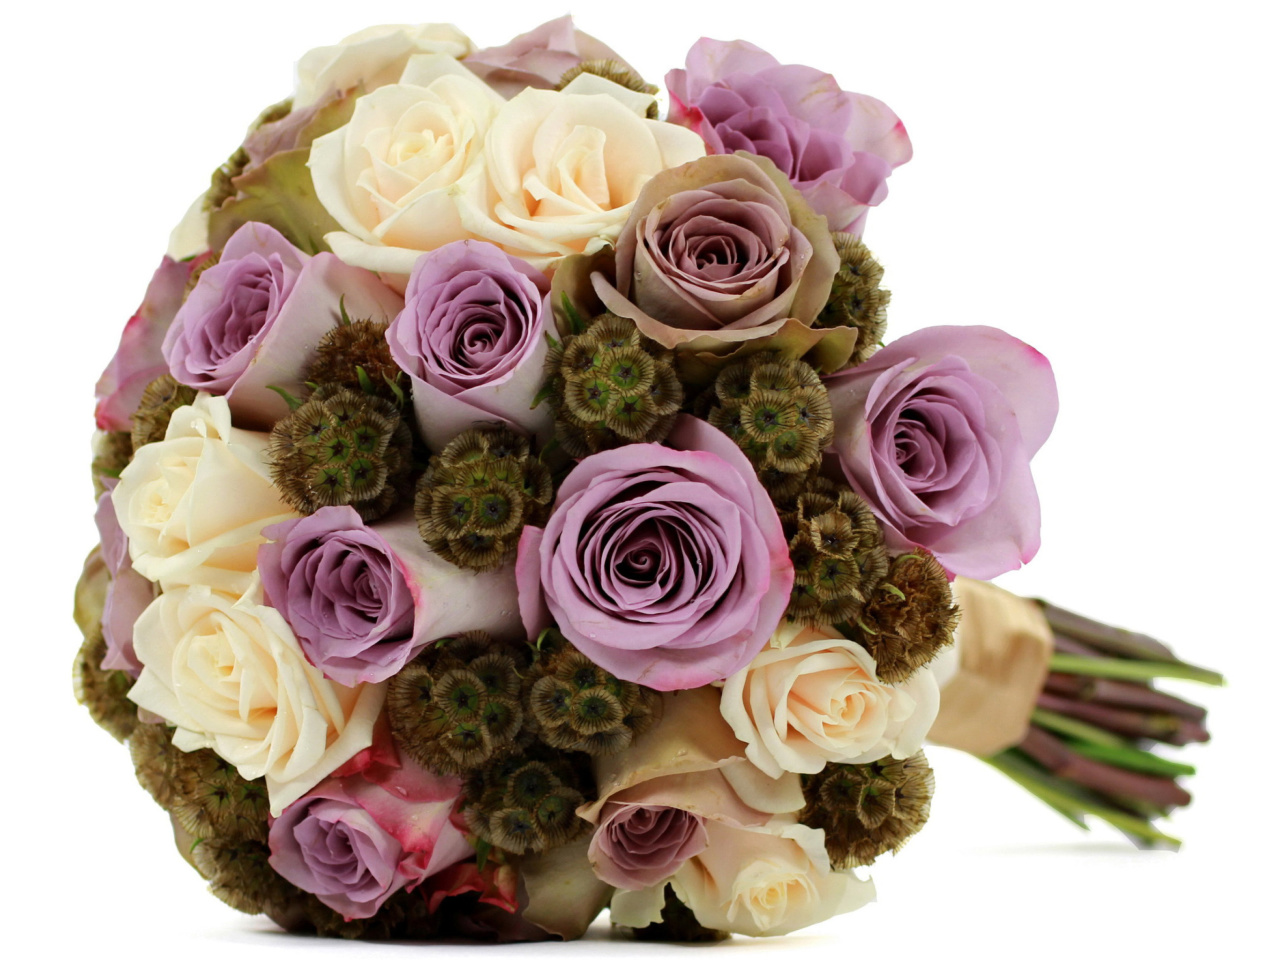 Das Bouquet with lilac roses Wallpaper 1280x960